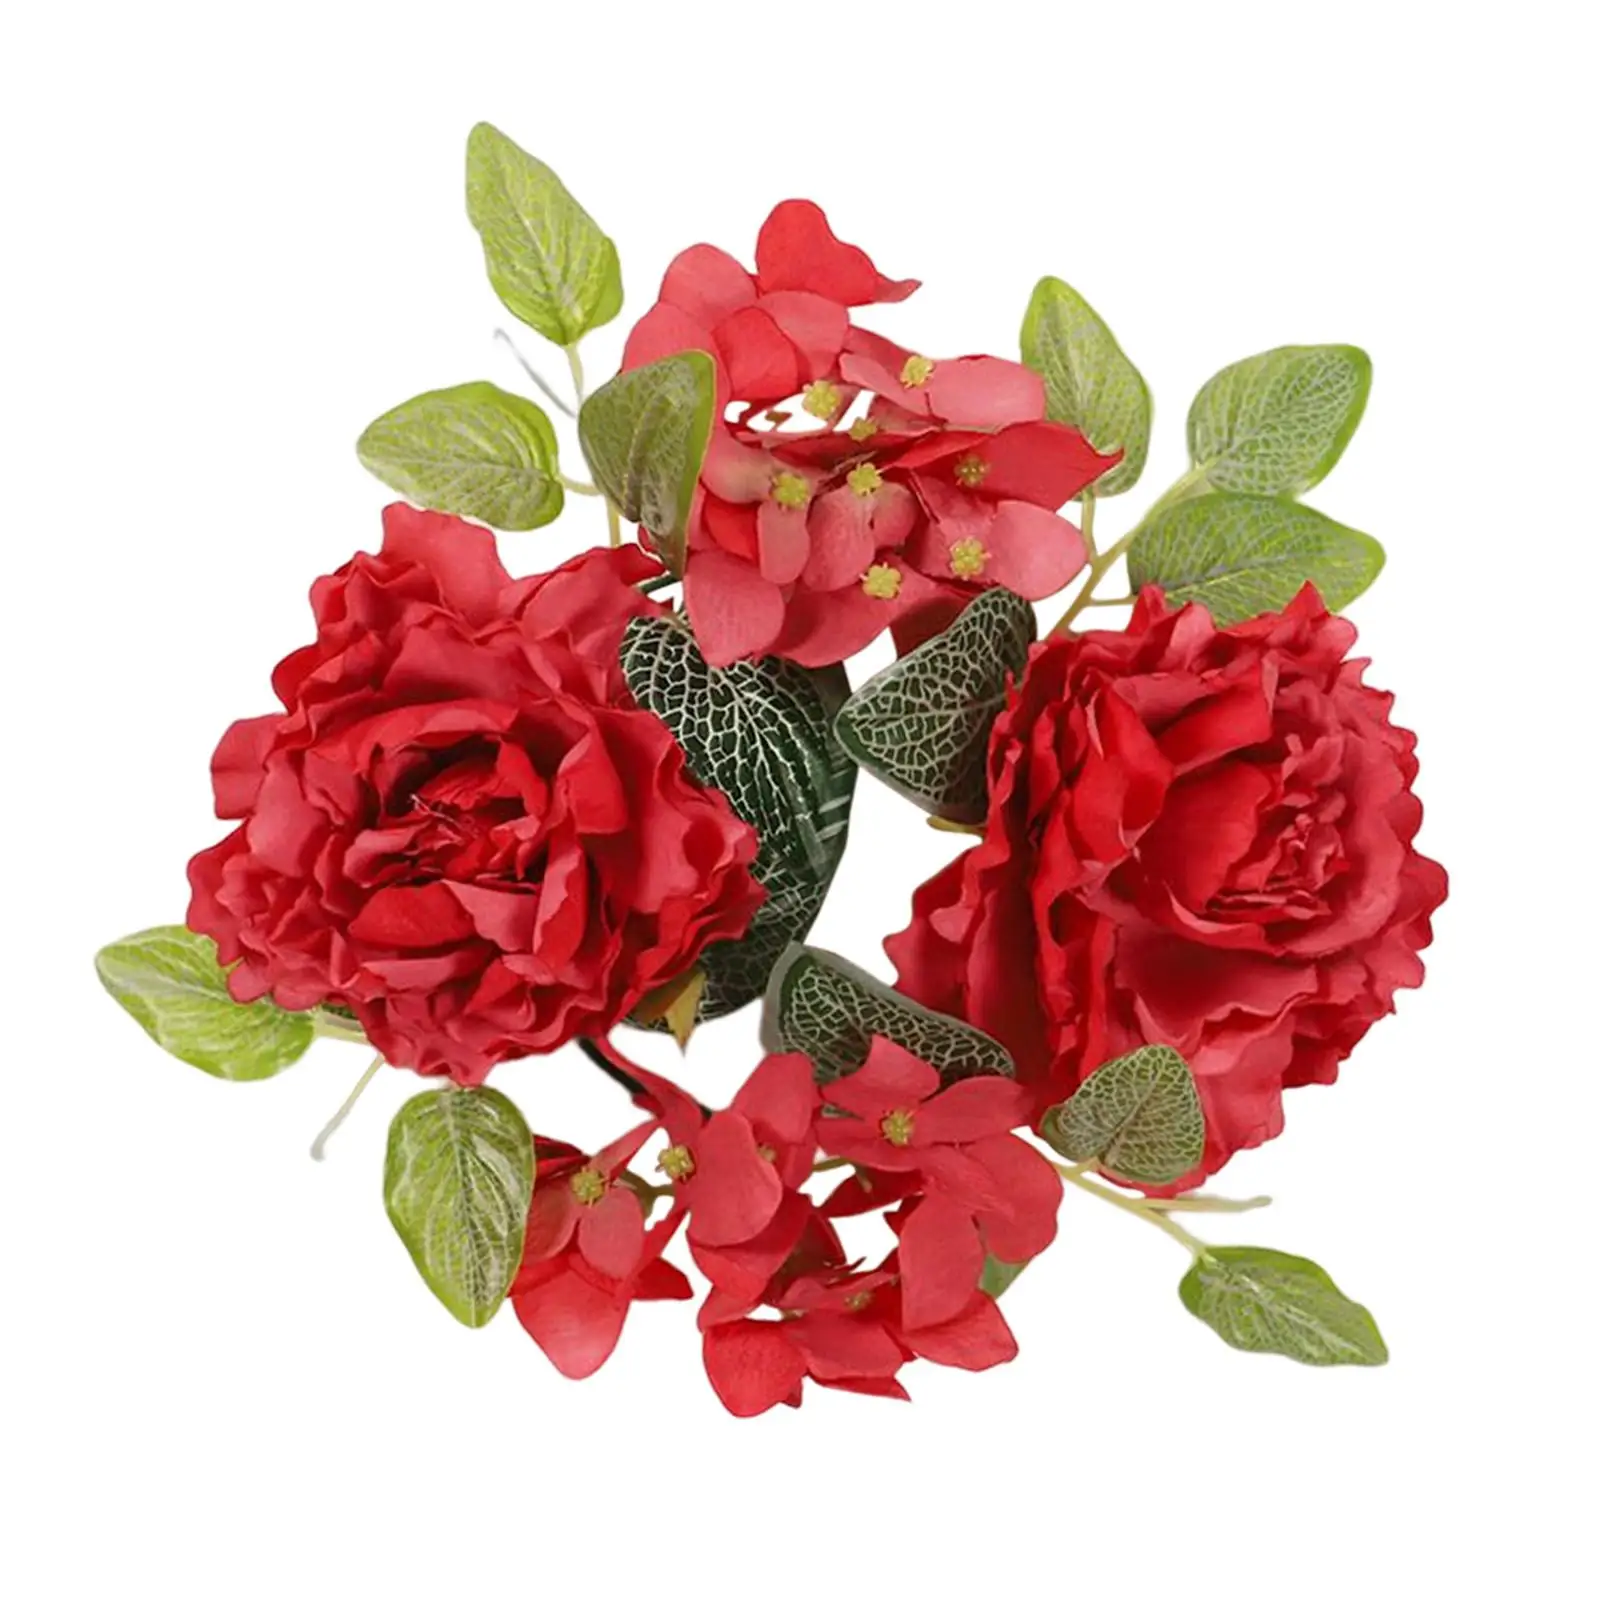 Artificial Candle Rings Wreaths Flower Garland Peony Wreath Decoration Candle Rings for Door Party Tabletop Farmhouse Ornaments